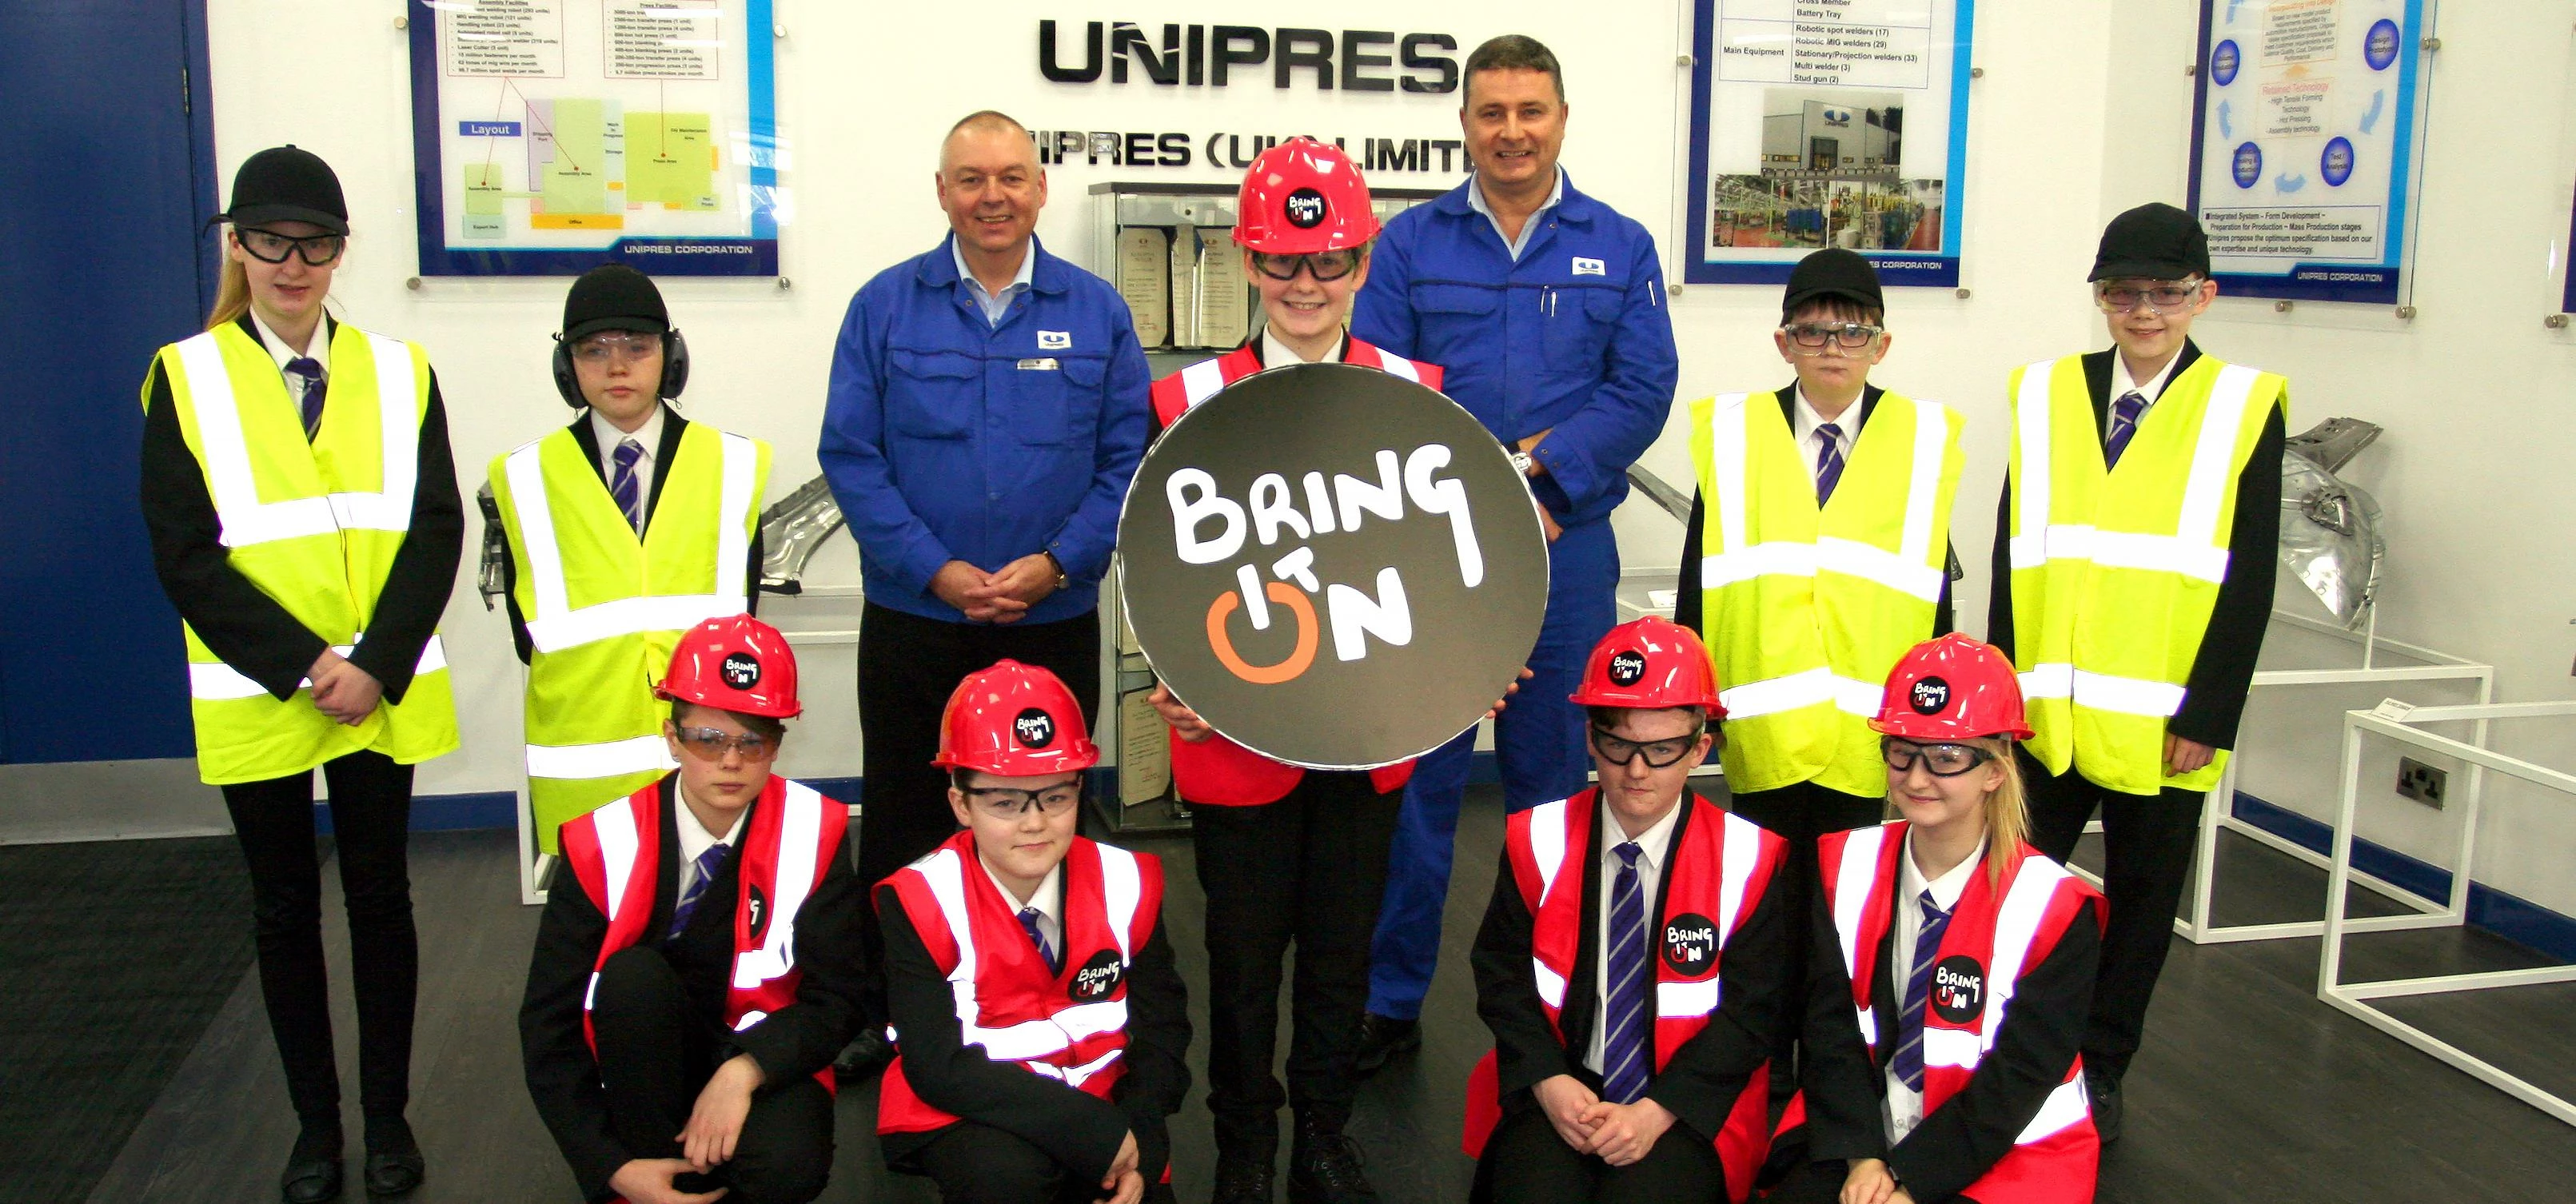 Students from Castle View Academy, Sunderland with Unipres (UK) Ltd operations director John Cruddac